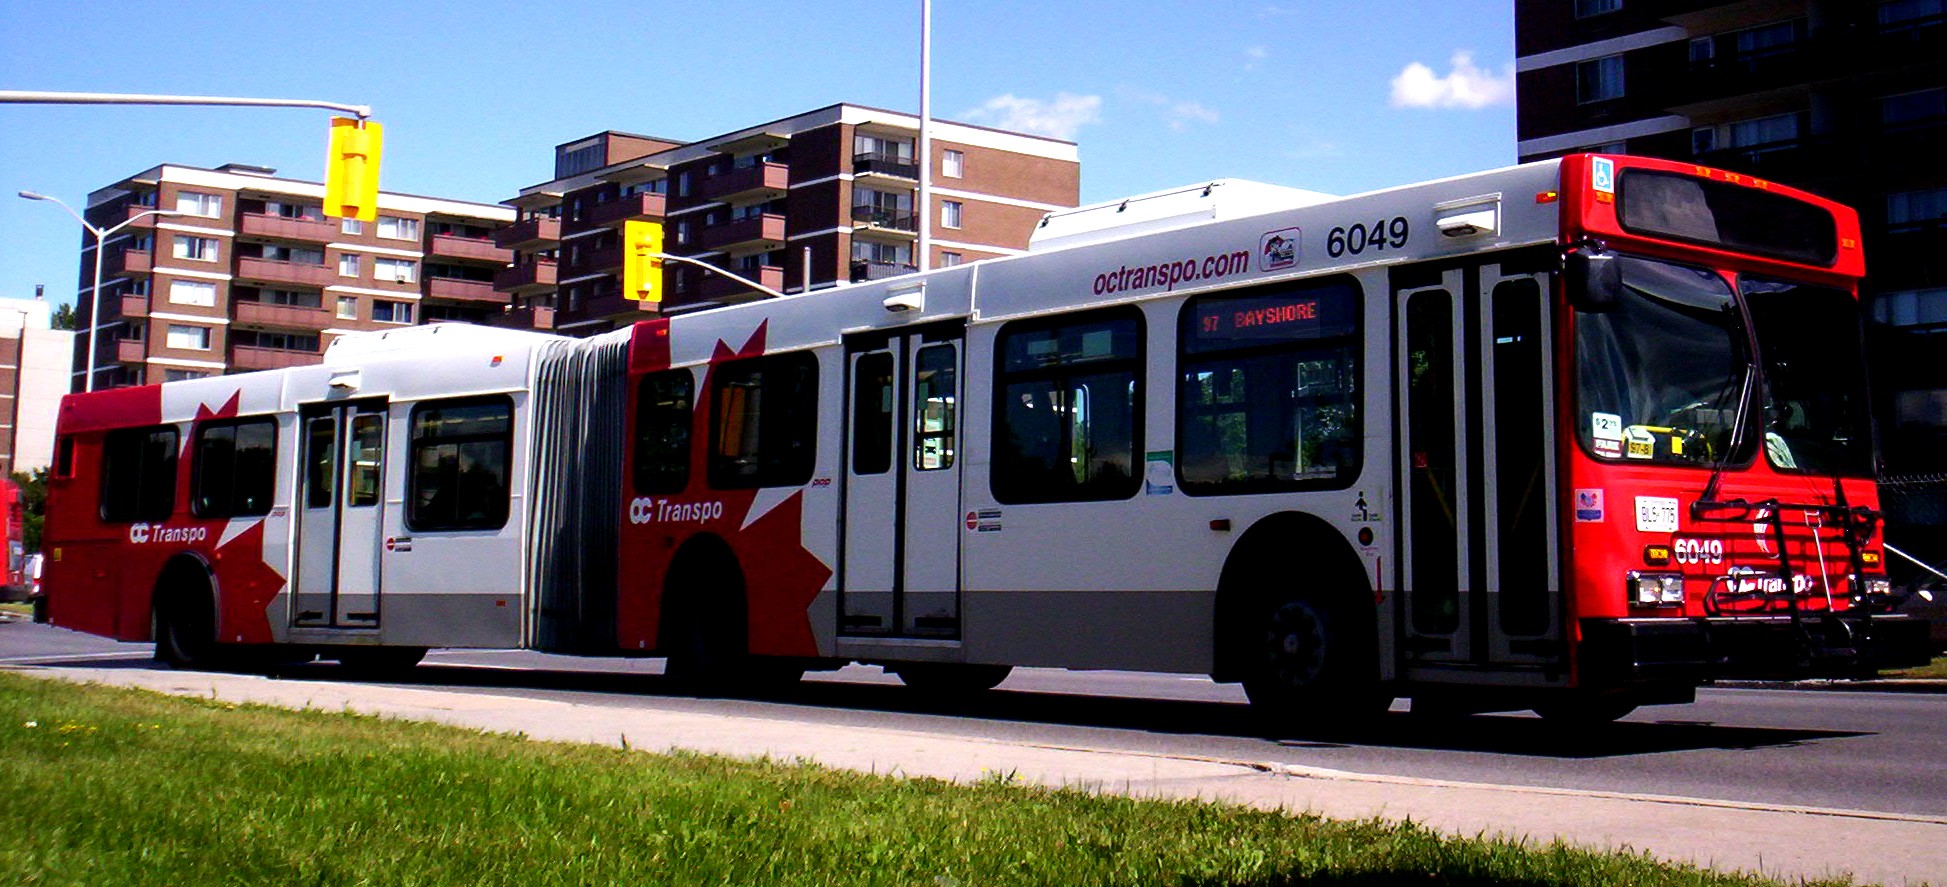 Another Positive OC Transpo Experience